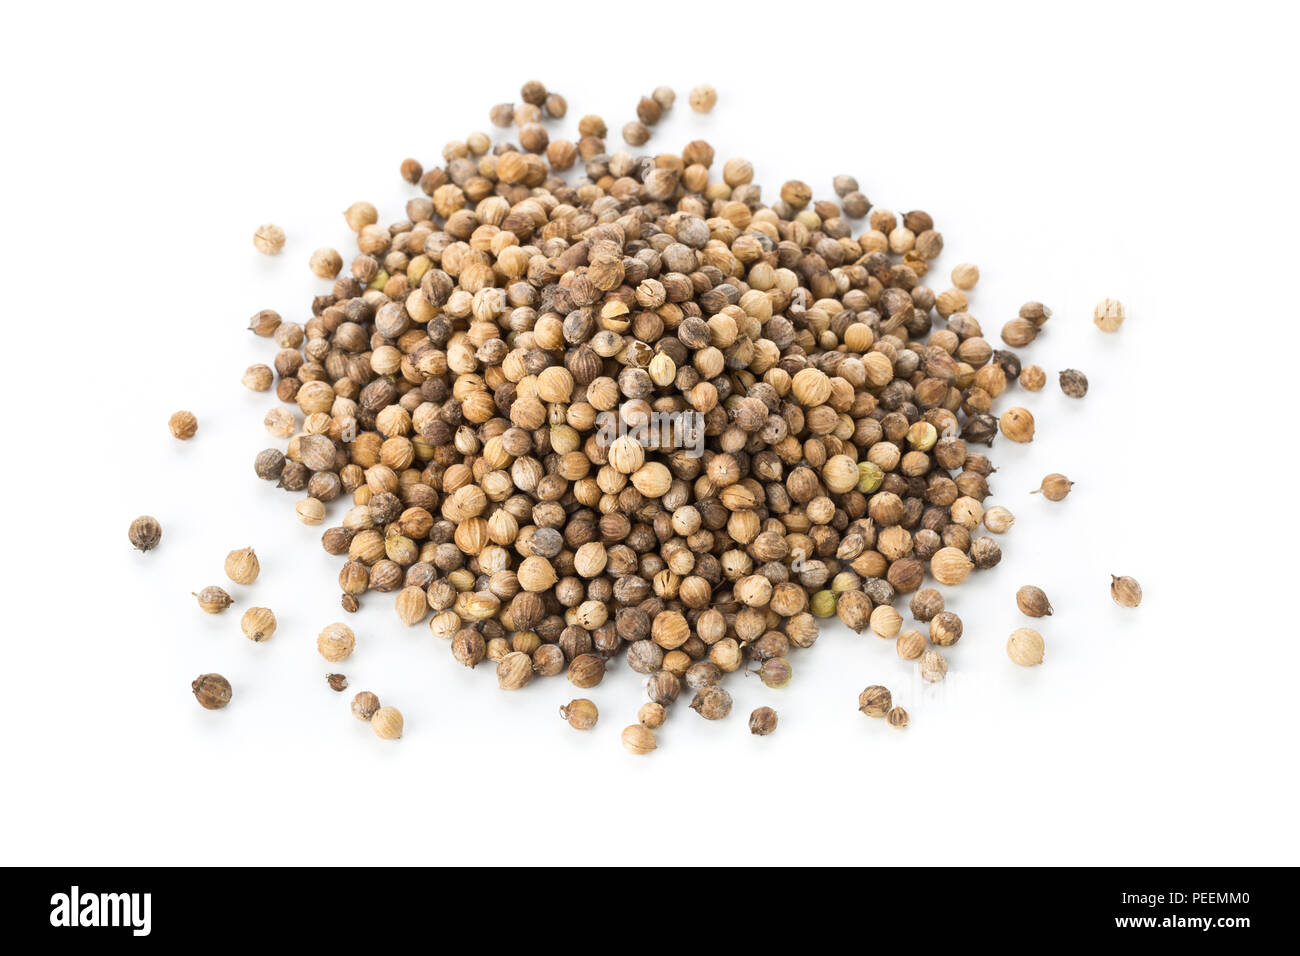 Heap of raw, unprocessed organic coriander or cilantro seeds on white background Stock Photo